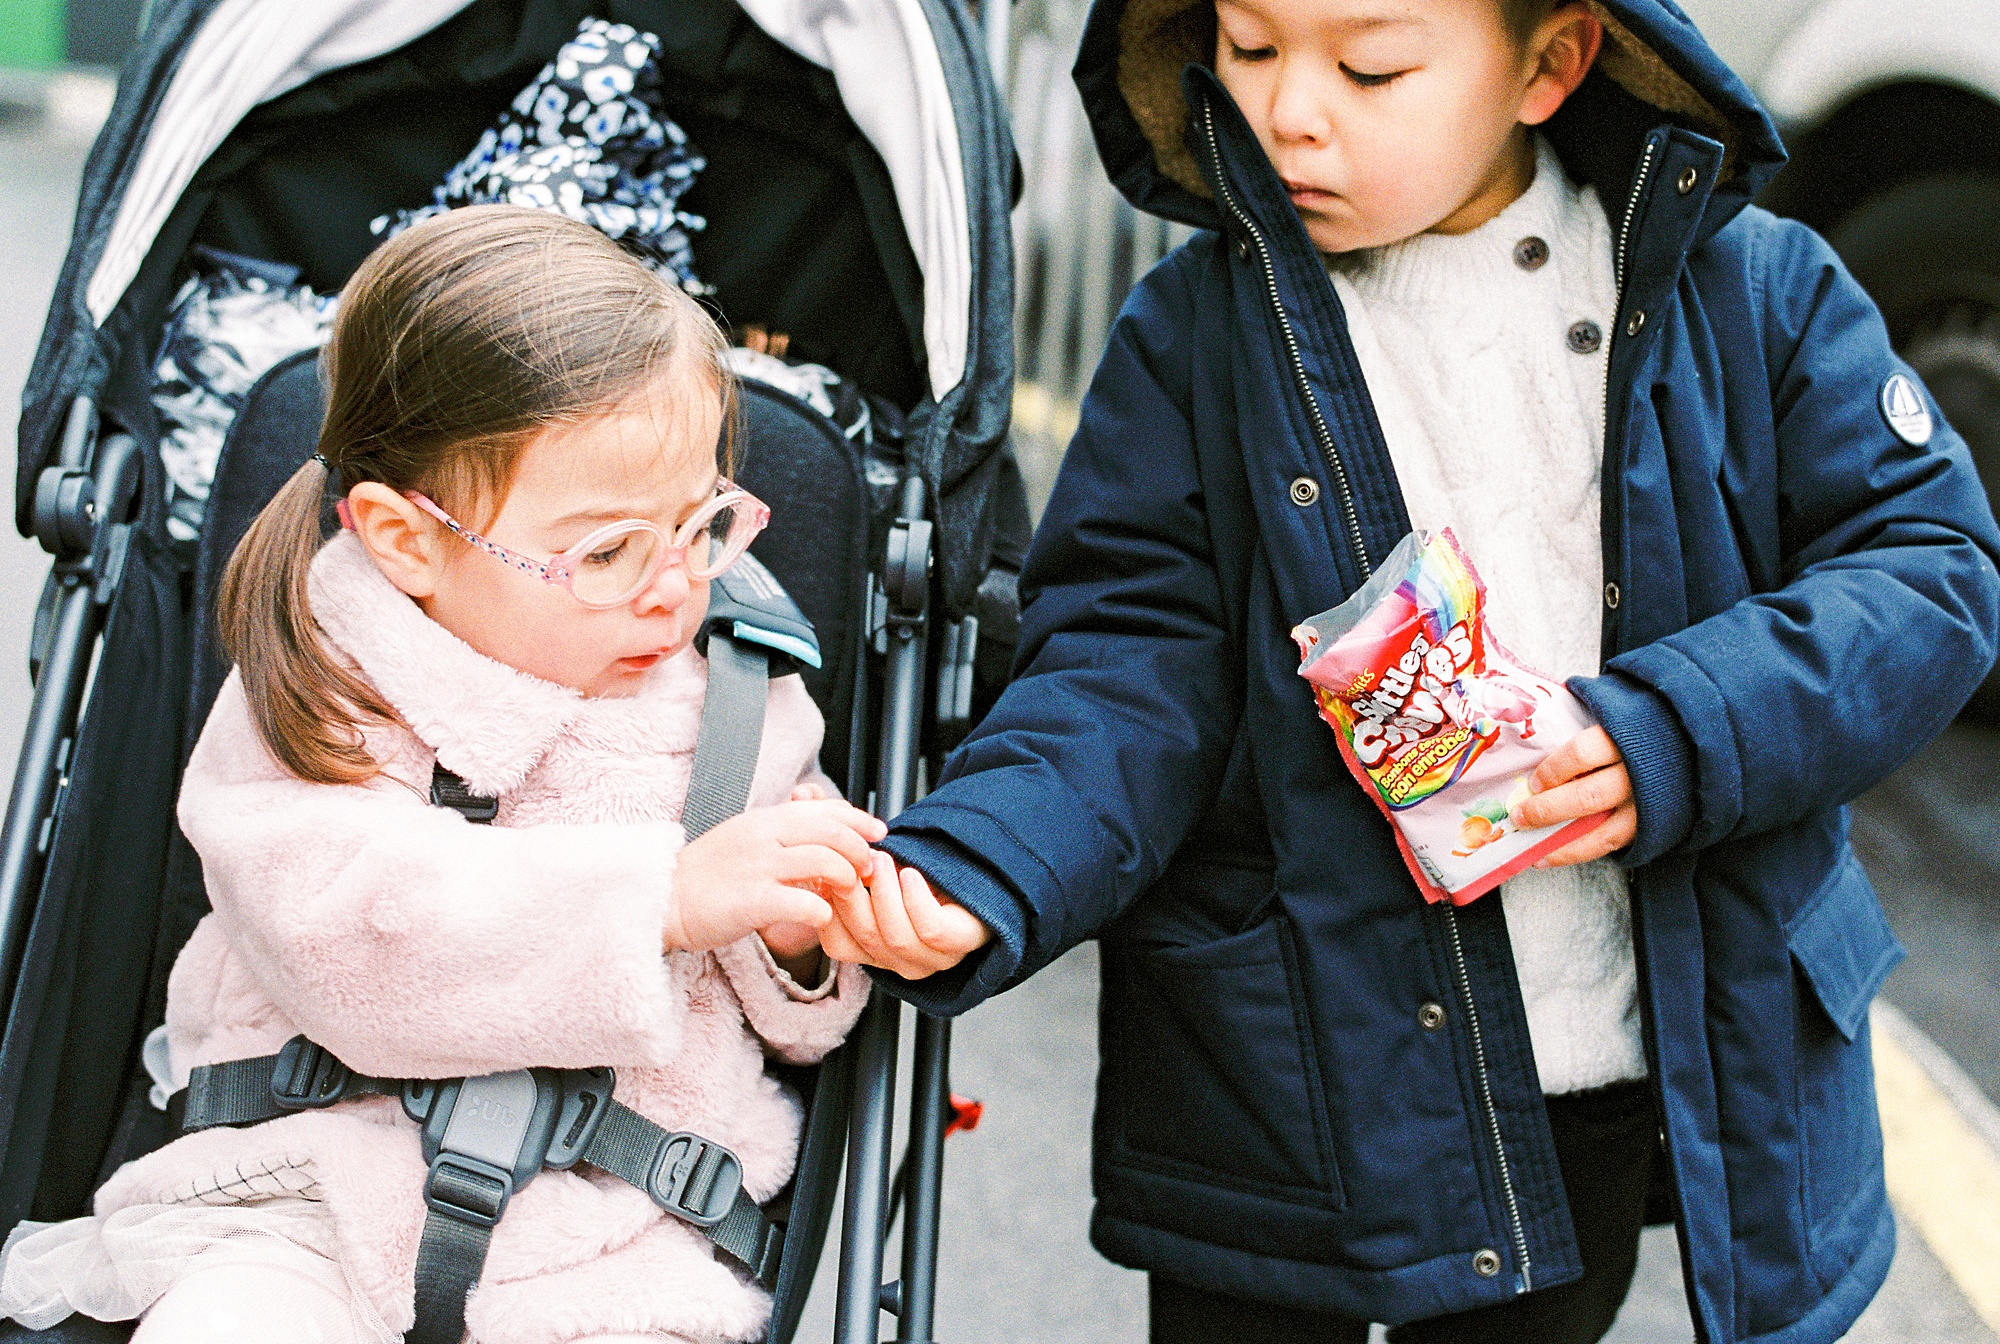 Two young children bundled up sharing candy in Paris